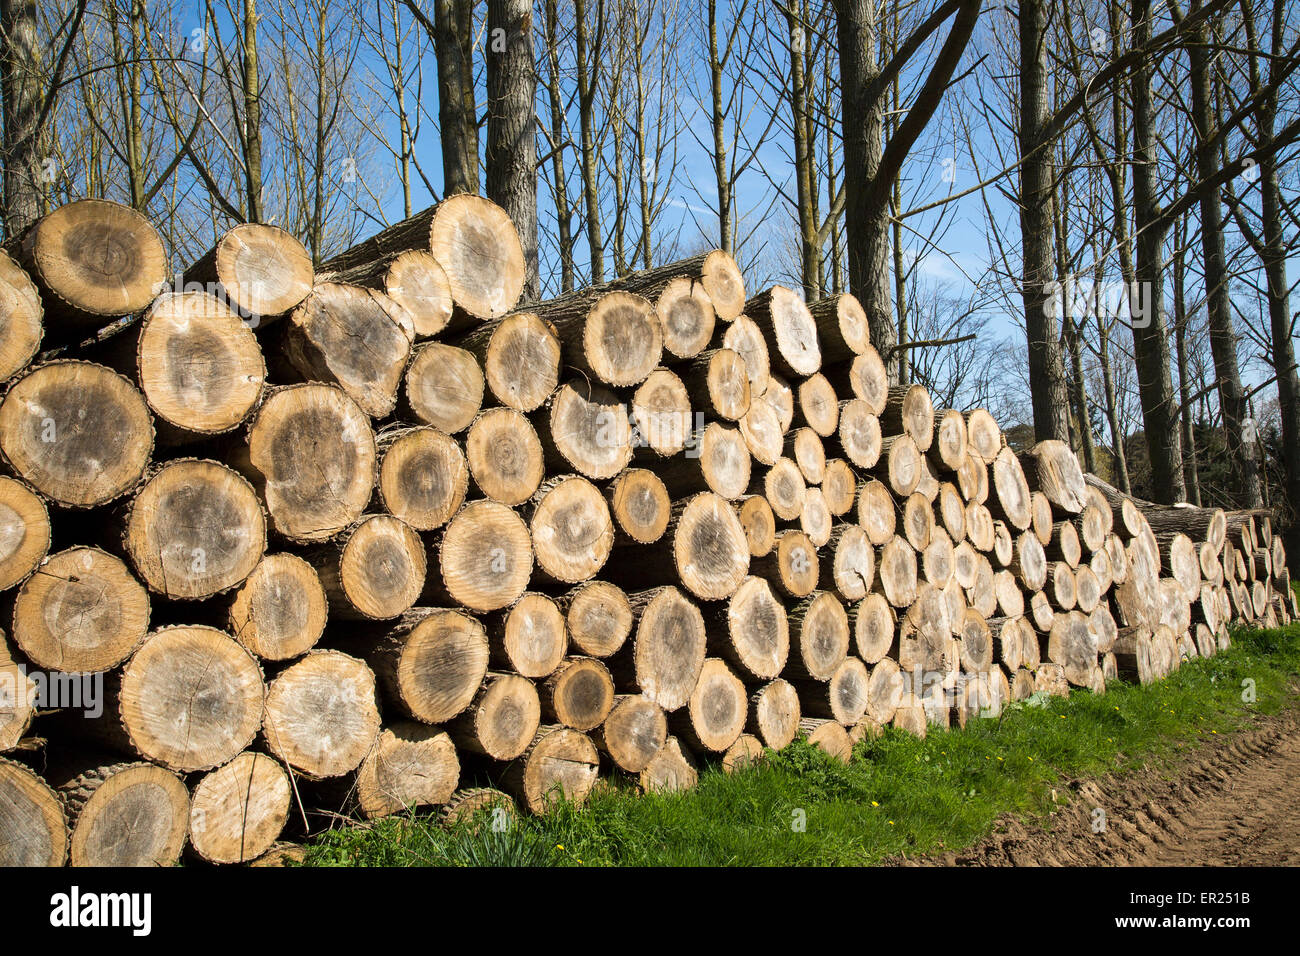 Stacked timber piled up, Sutton, Suffolk, England, UK Stock Photo